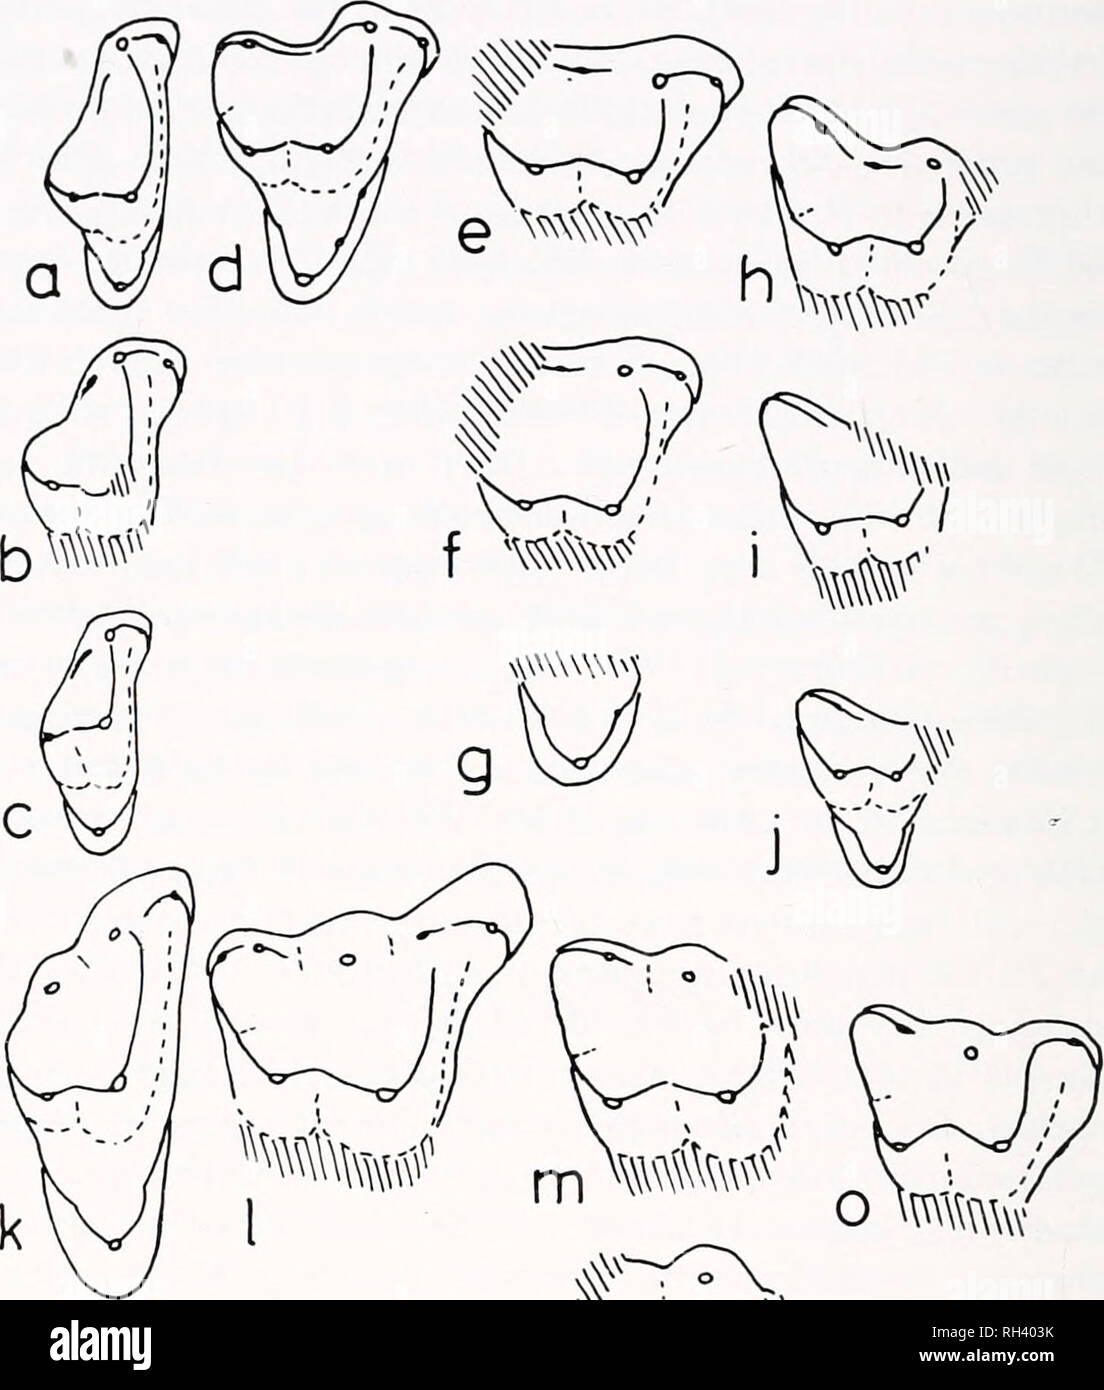 . Breviora. BREVIORA No. 446. 1 mm &gt; &lt; Figure 2. Crown views of upper molars, a, SMP-SMU 61725 (holotype of Pappotherium pattersoni); b, PM 1015; c, PM 1075; d, SMP-SMU 61725 (holotype of P. pattersoni); e, PM 884; f, PM 1749; g, PM 1325? fi, PM 999; i, PM 1238; j, SMP-SMU 62402; k, SMP-SMU 62099 (paratype of Holoclemensia texana); 1, SMP-SMU 61947 (holotype of H. lexana), m, PM 886; n, PM 1004; o, PM 1000; p, PM 1287. All drawn as right teeth: b, c, e, f, i, o, p have been reversed.. Please note that these images are extracted from scanned page images that may have been digitally enhanc Stock Photo